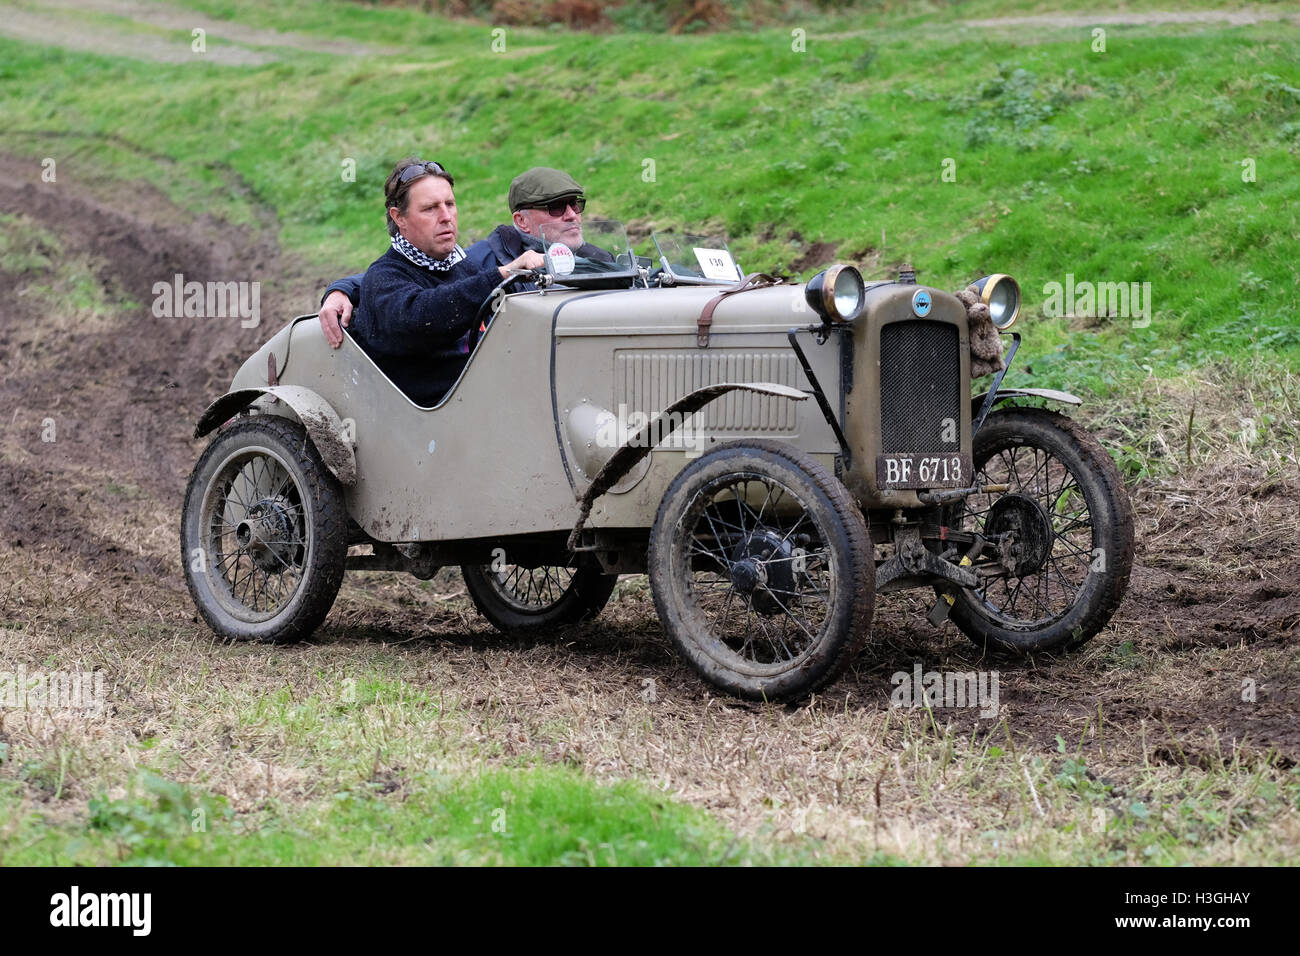 Badlands Farm, Kinnerton, Powys, Wales, UK - Saturday 8th October 2016 - Competitors in a 1930 Austin 7 Ulster Sports Replica take part in the Vintage Sports-Car Club ( VSCC ) hill climb at Badlands a long muddy track and hillside climb in Powys. Competitors earn points not for speed or time but how far up the hill they manage to drive their vintage sports car. Stock Photo